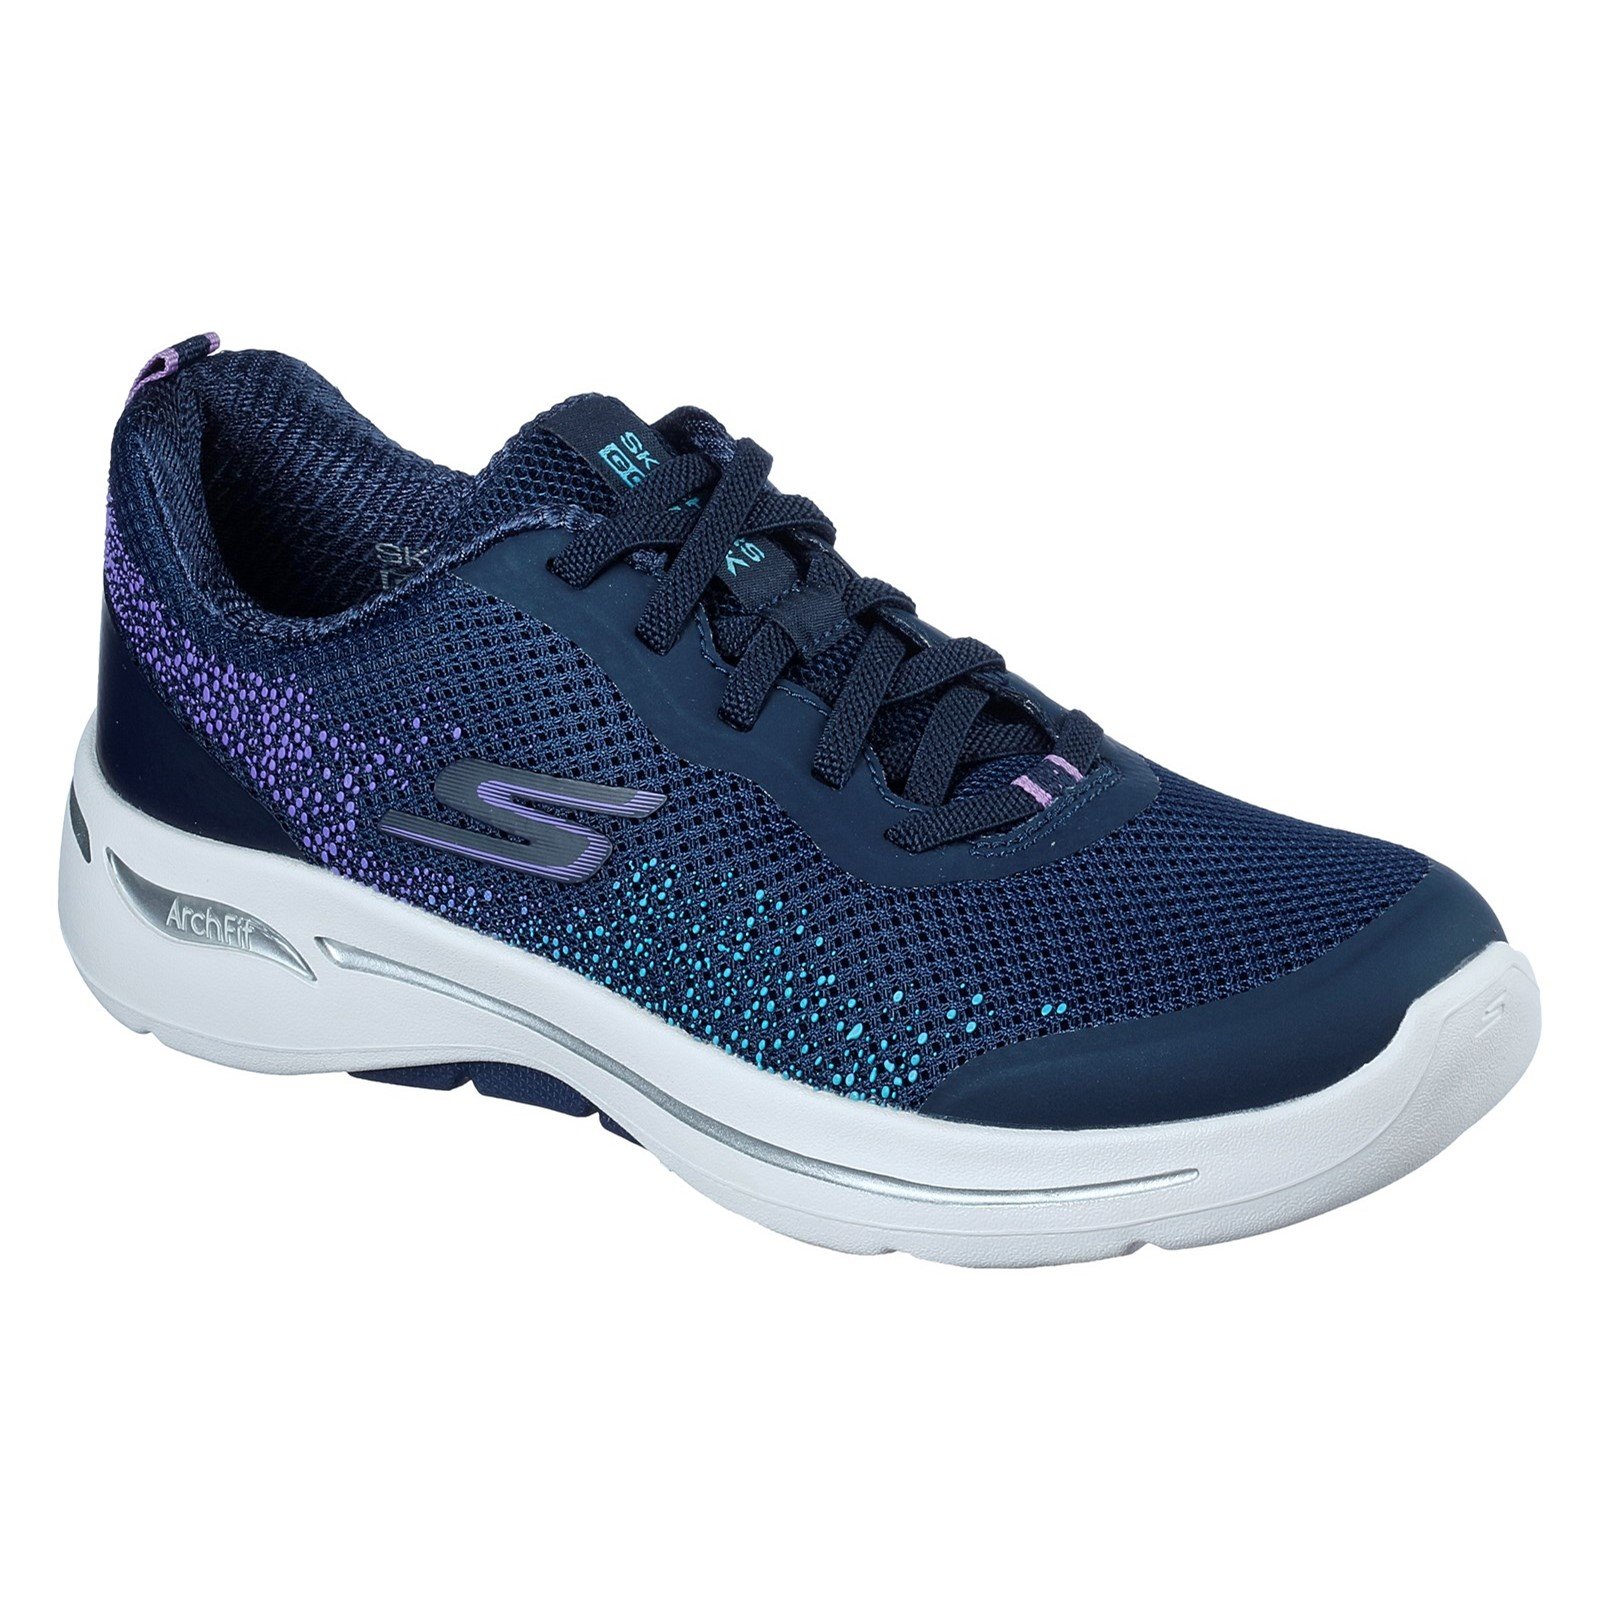 Skechers Women's Go Walk Arch Fit Flying Stars Trainer Various Colours 32841 - Navy/Lavender 5